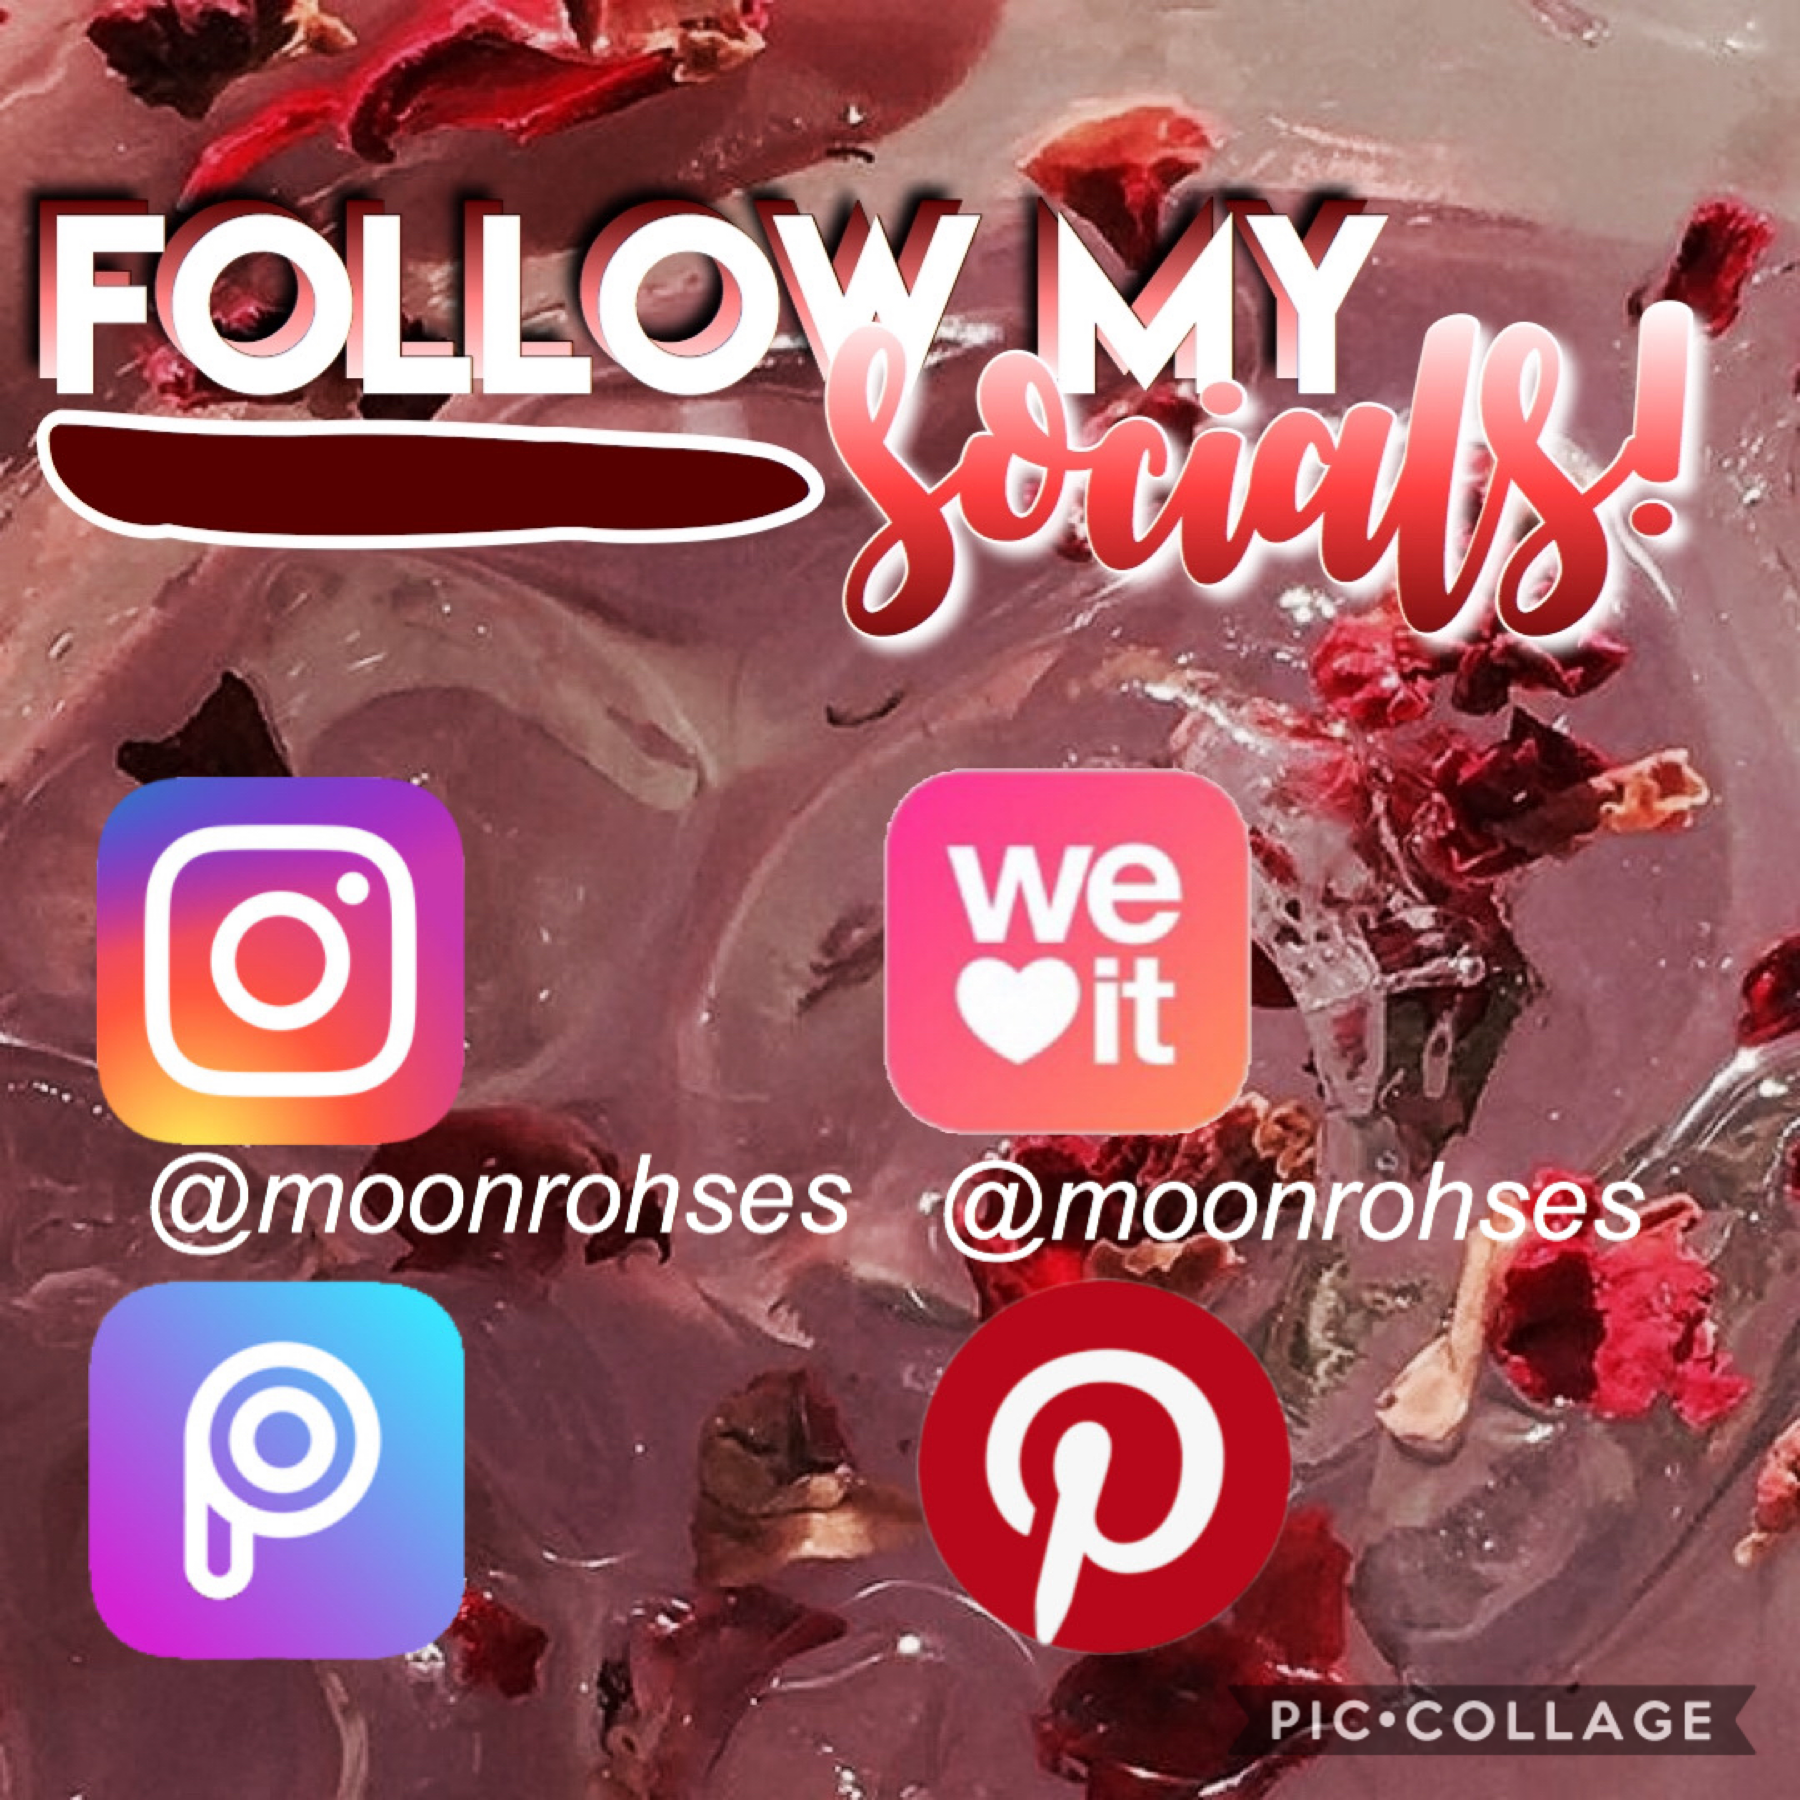 🧨 t a p 🧨

Yes, all my socials are @moonrohses so make sure to go follow!!